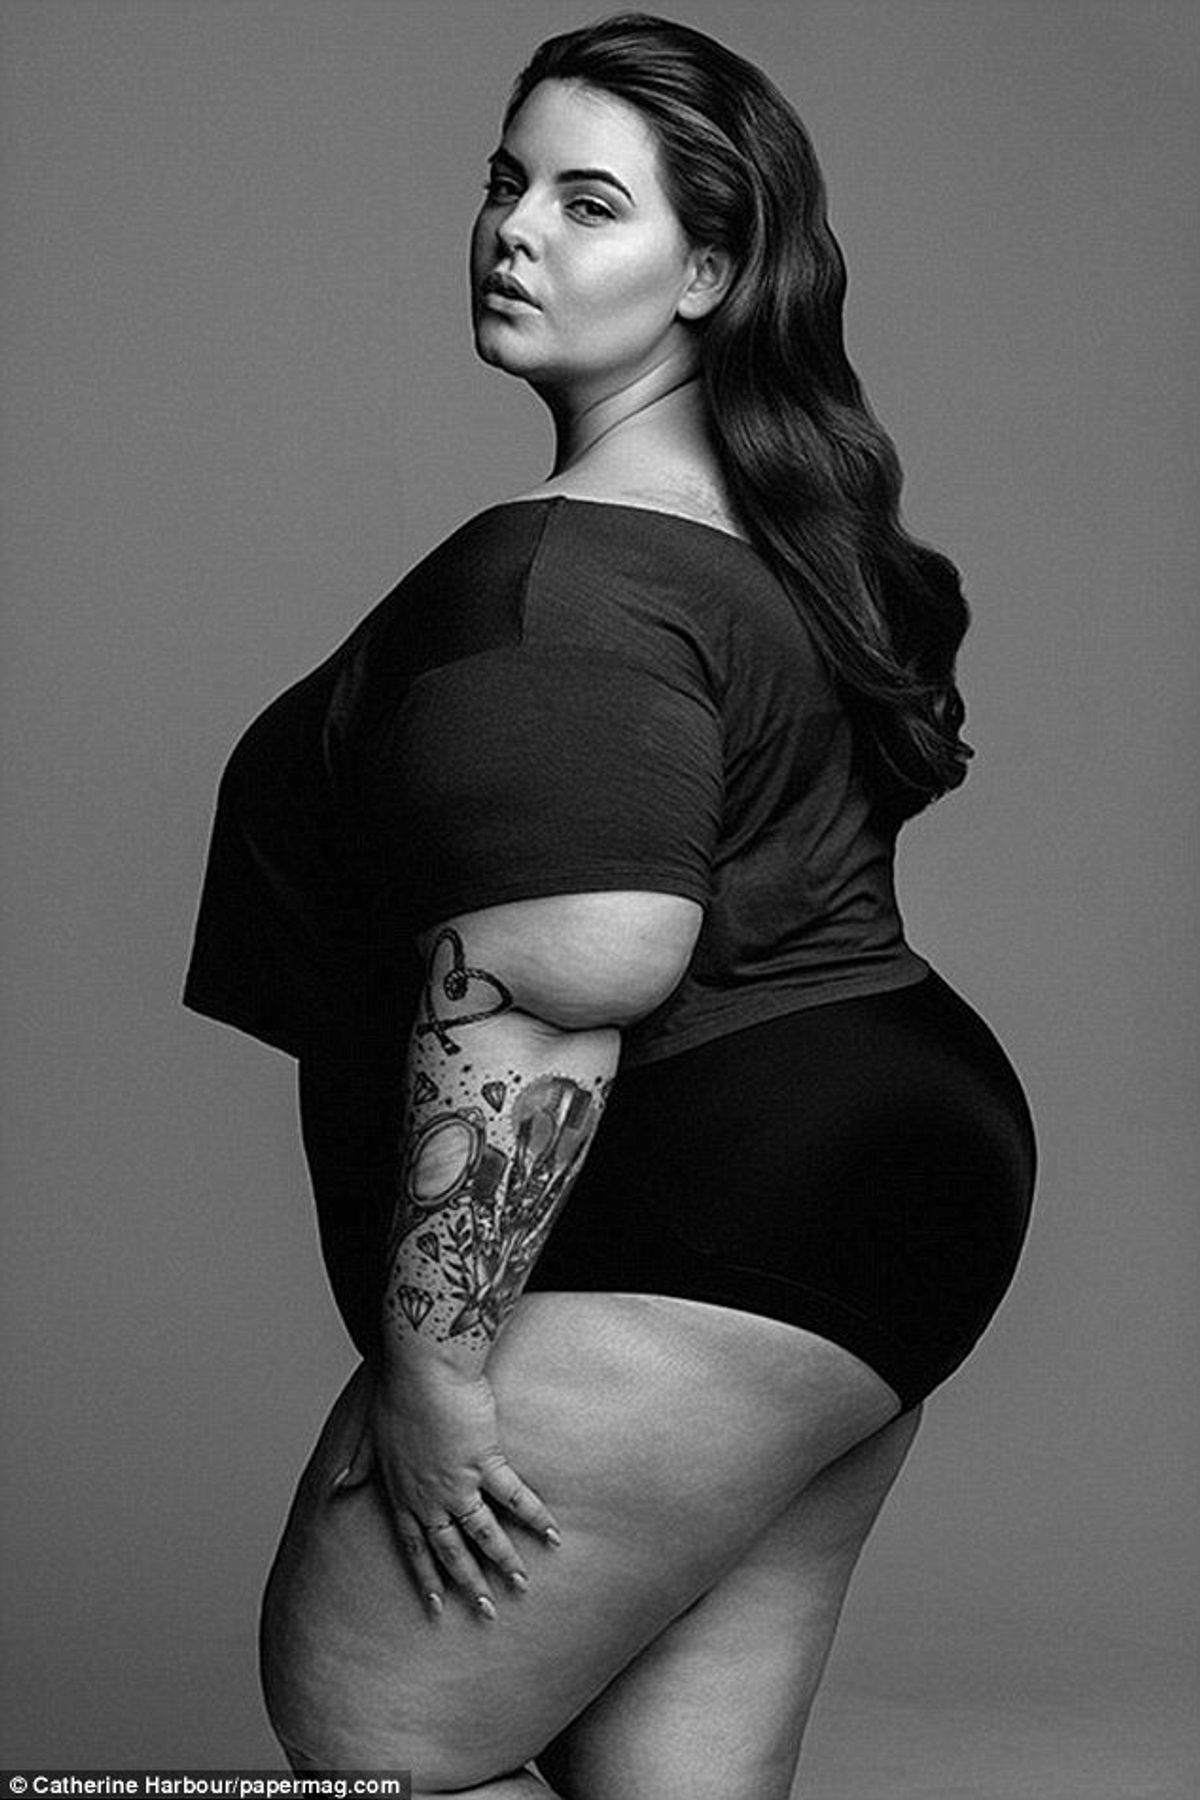 Plus Size Dominating The Fashion Industry